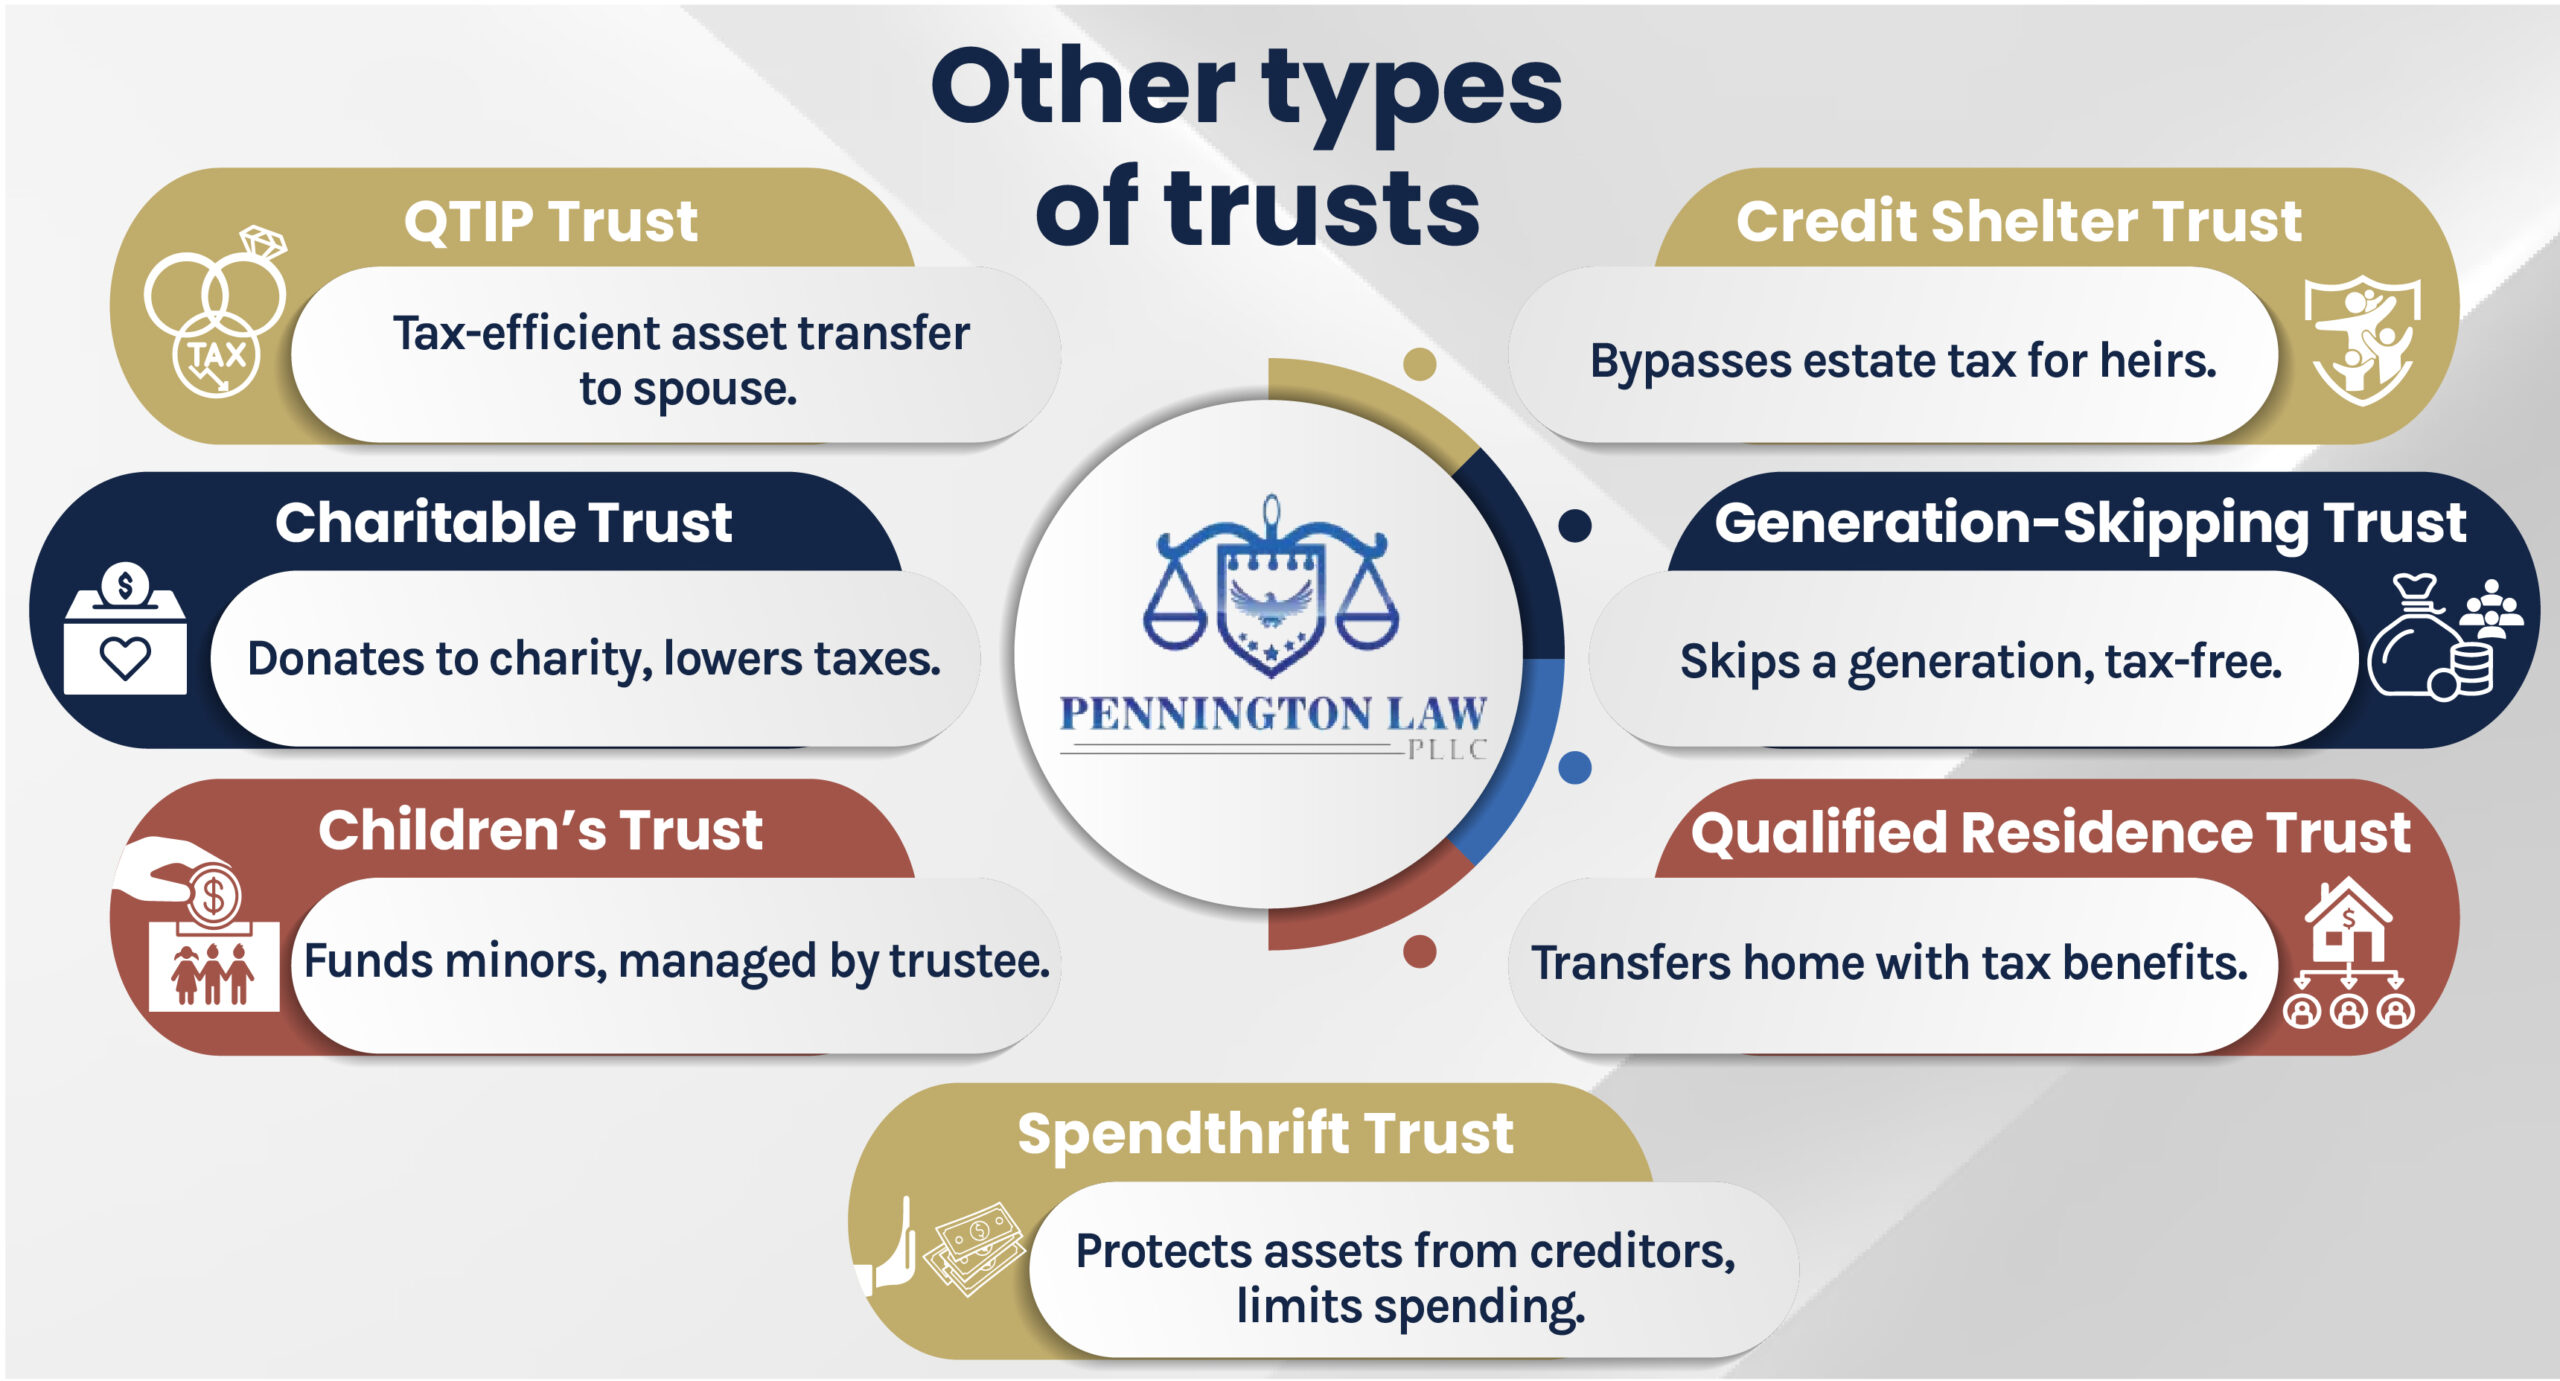 Other types of trusts